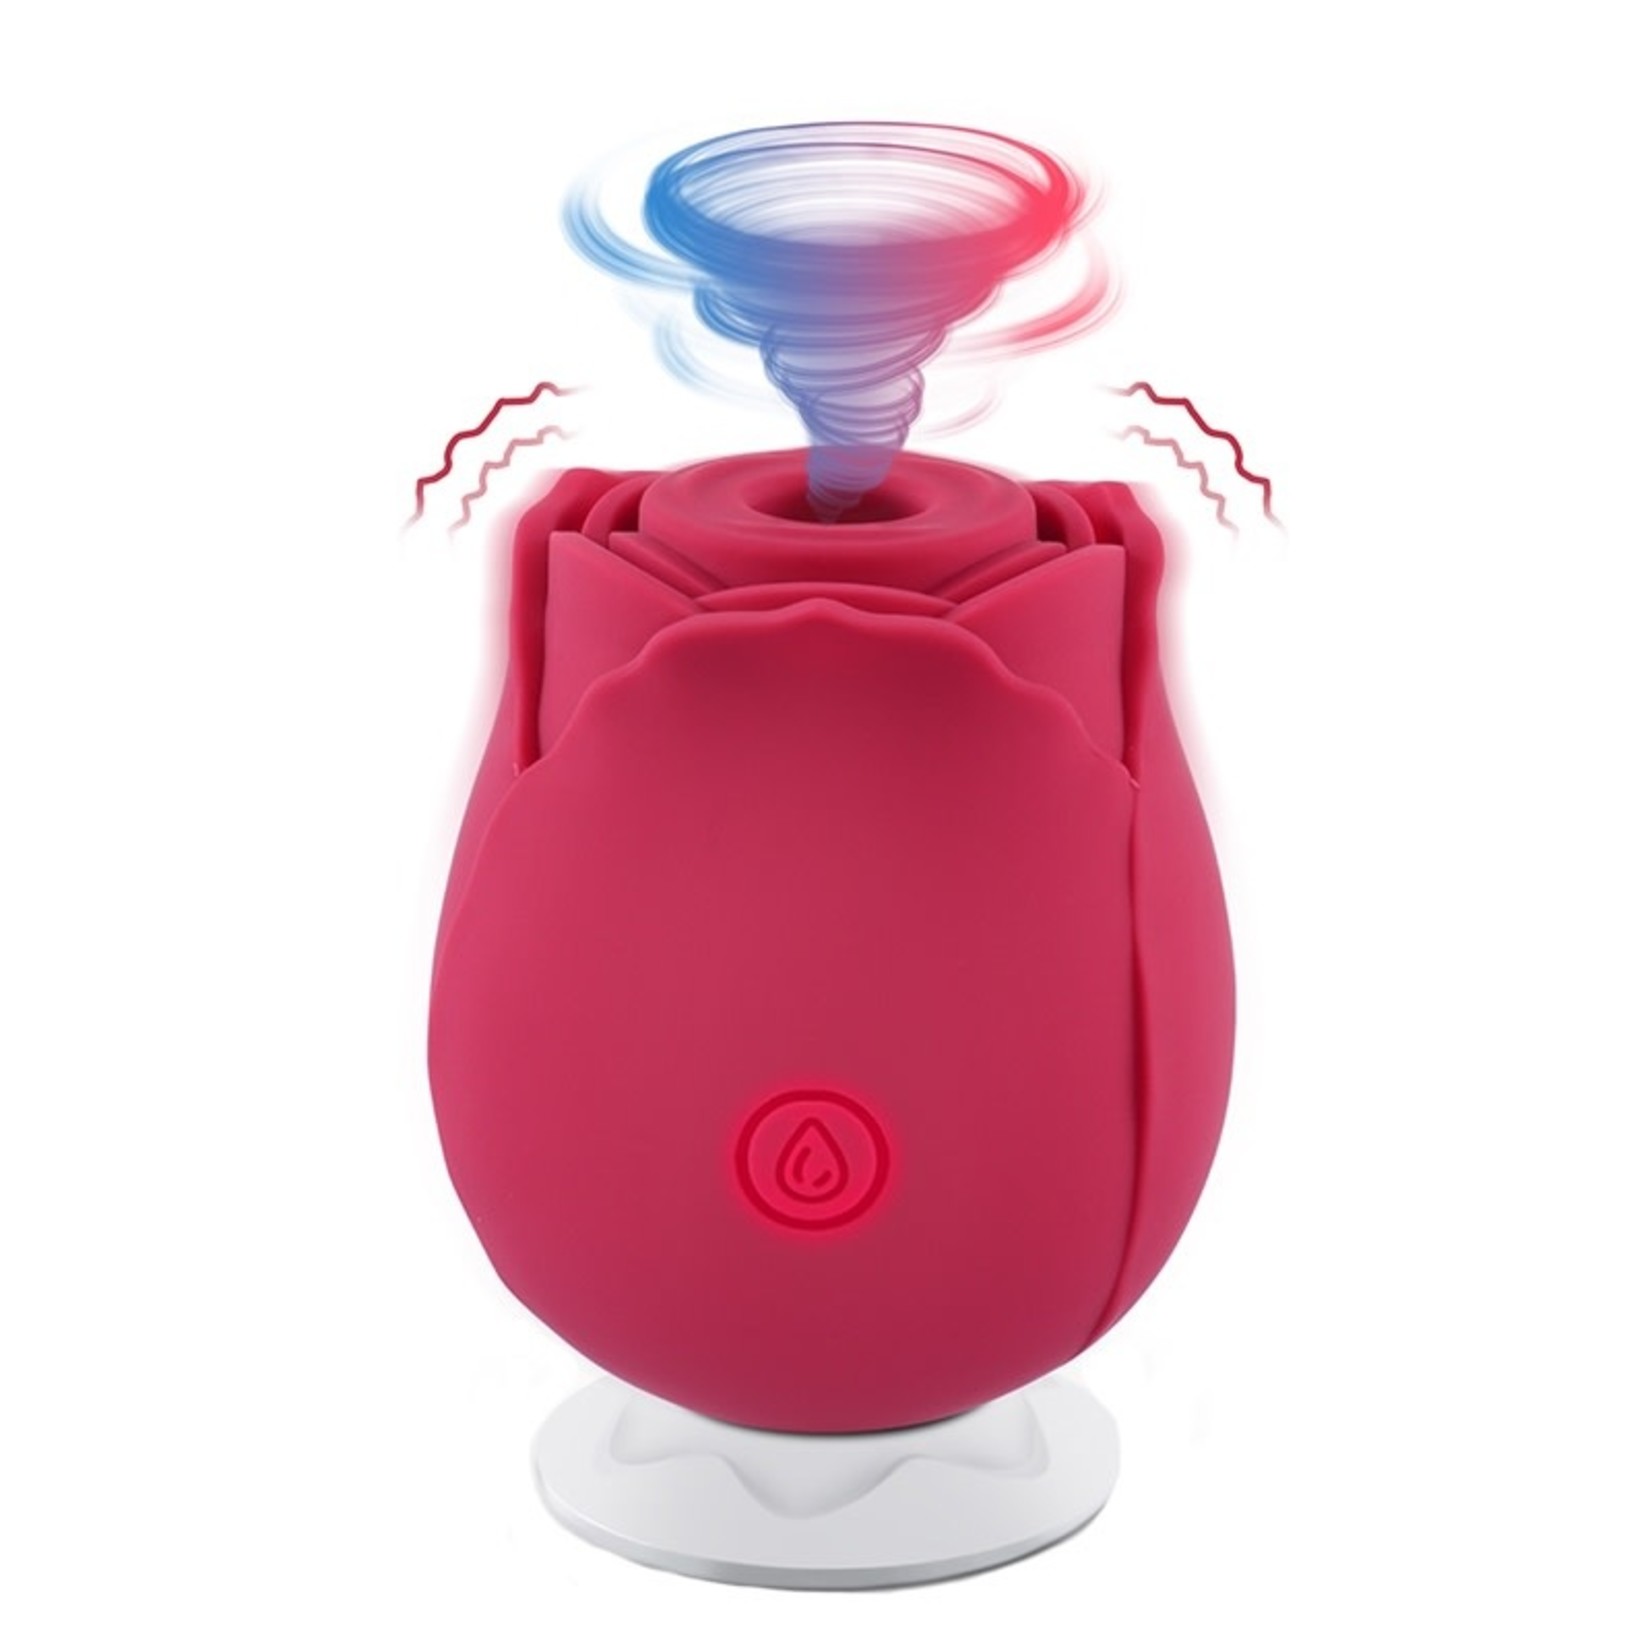 TRACY'S DOG TRACY'S DOG ROSE VIBRATOR - RED